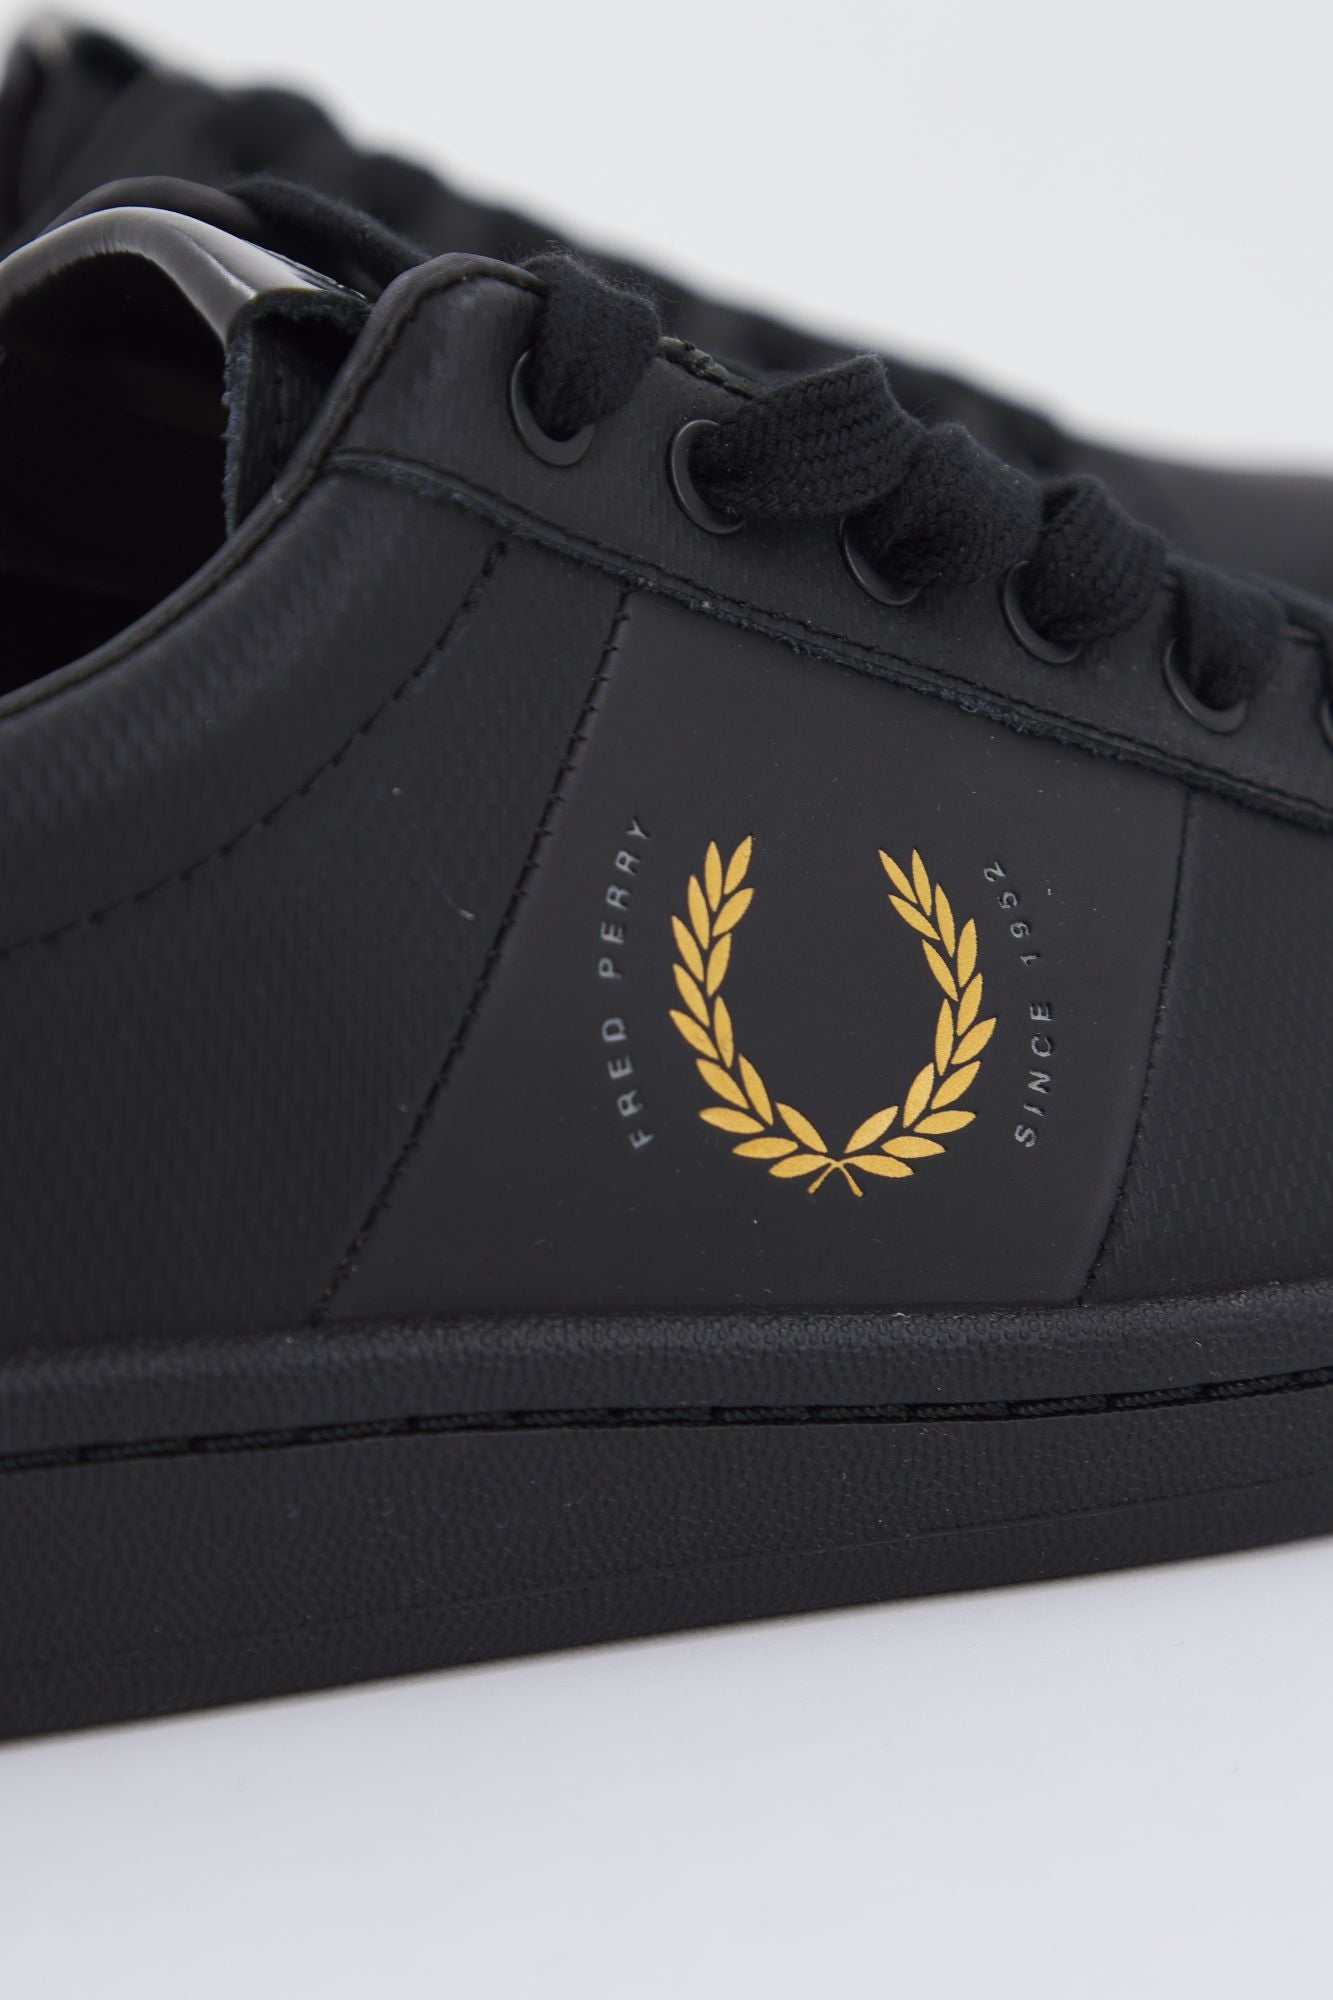 FRED PERRY B2341 en color NEGRO (3)